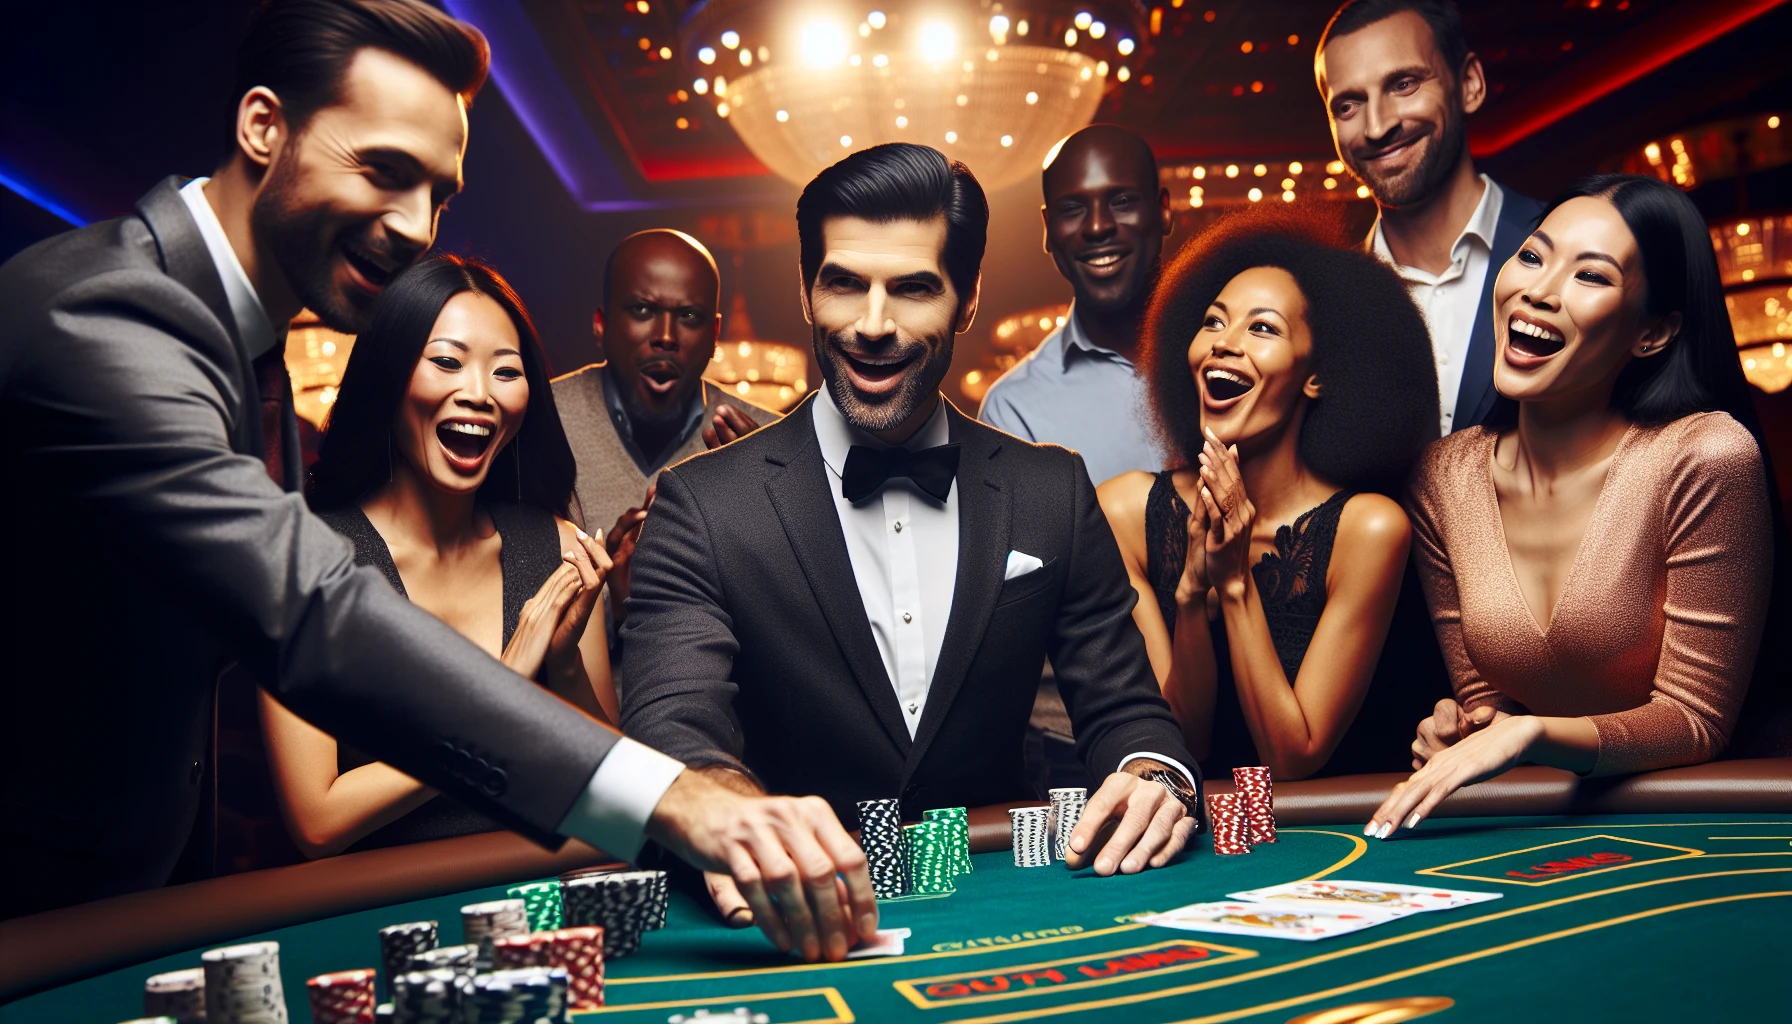 Illustration of a casino dealer hosting a live table game with enthusiastic guests